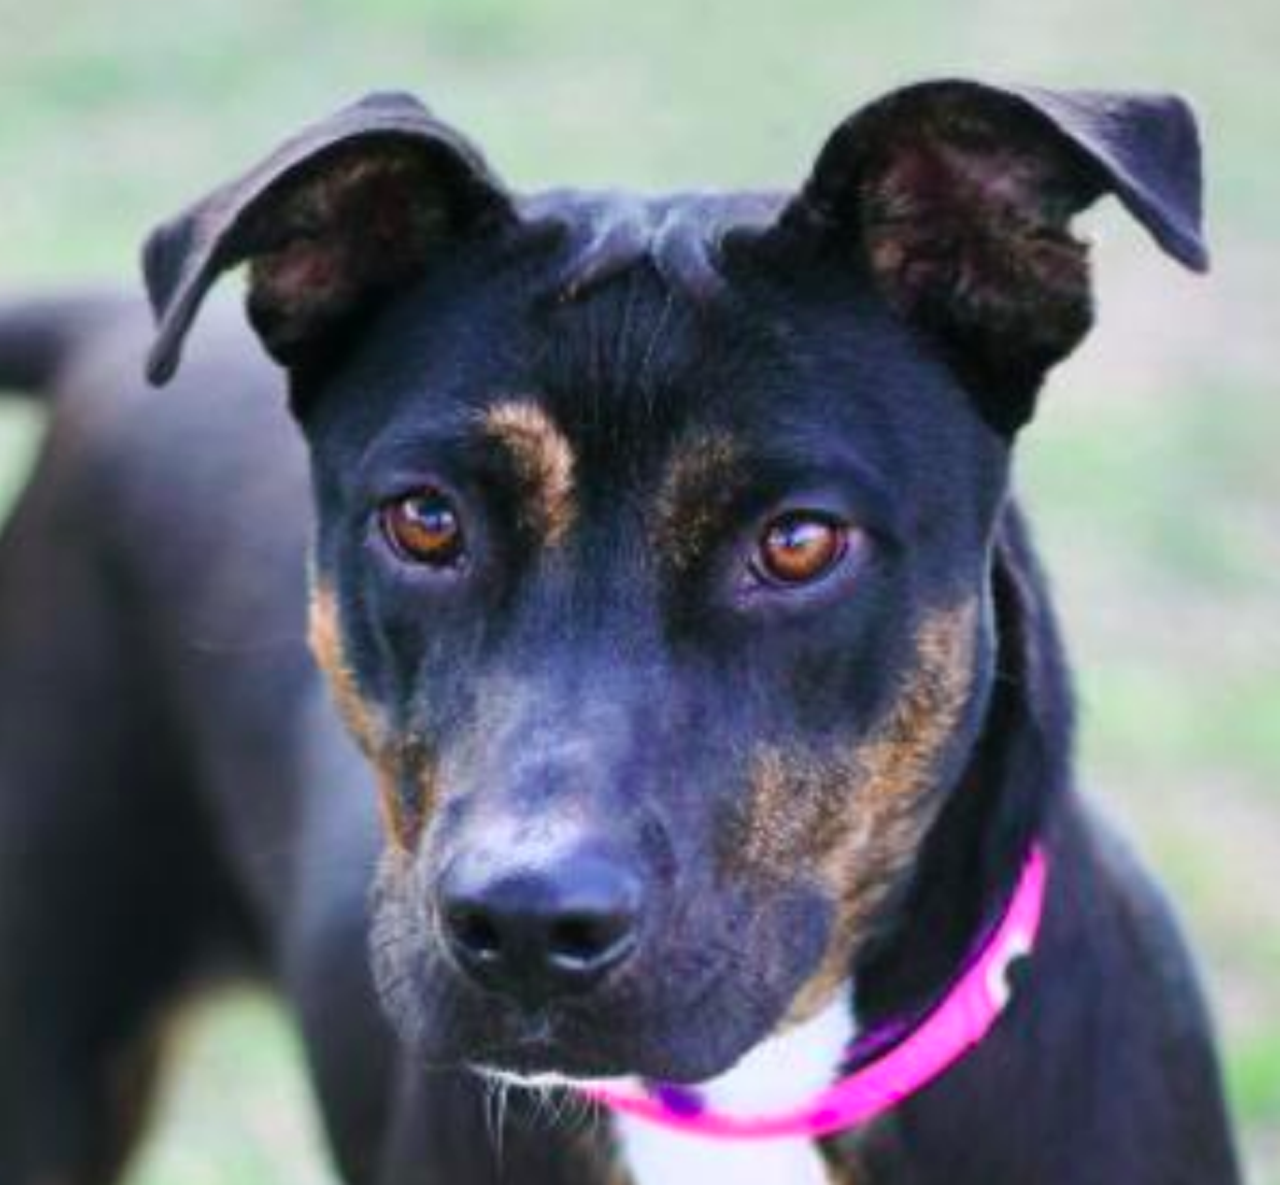 Alina
"Hi, I'm Alina! I'm a sweet and social girl that's ready for adventure. I love tasty treats and plush toys! I make a great walking partner who still knows how to chill on the couch. I'm good with most dogs and playful with kids. Come by and meet me!"